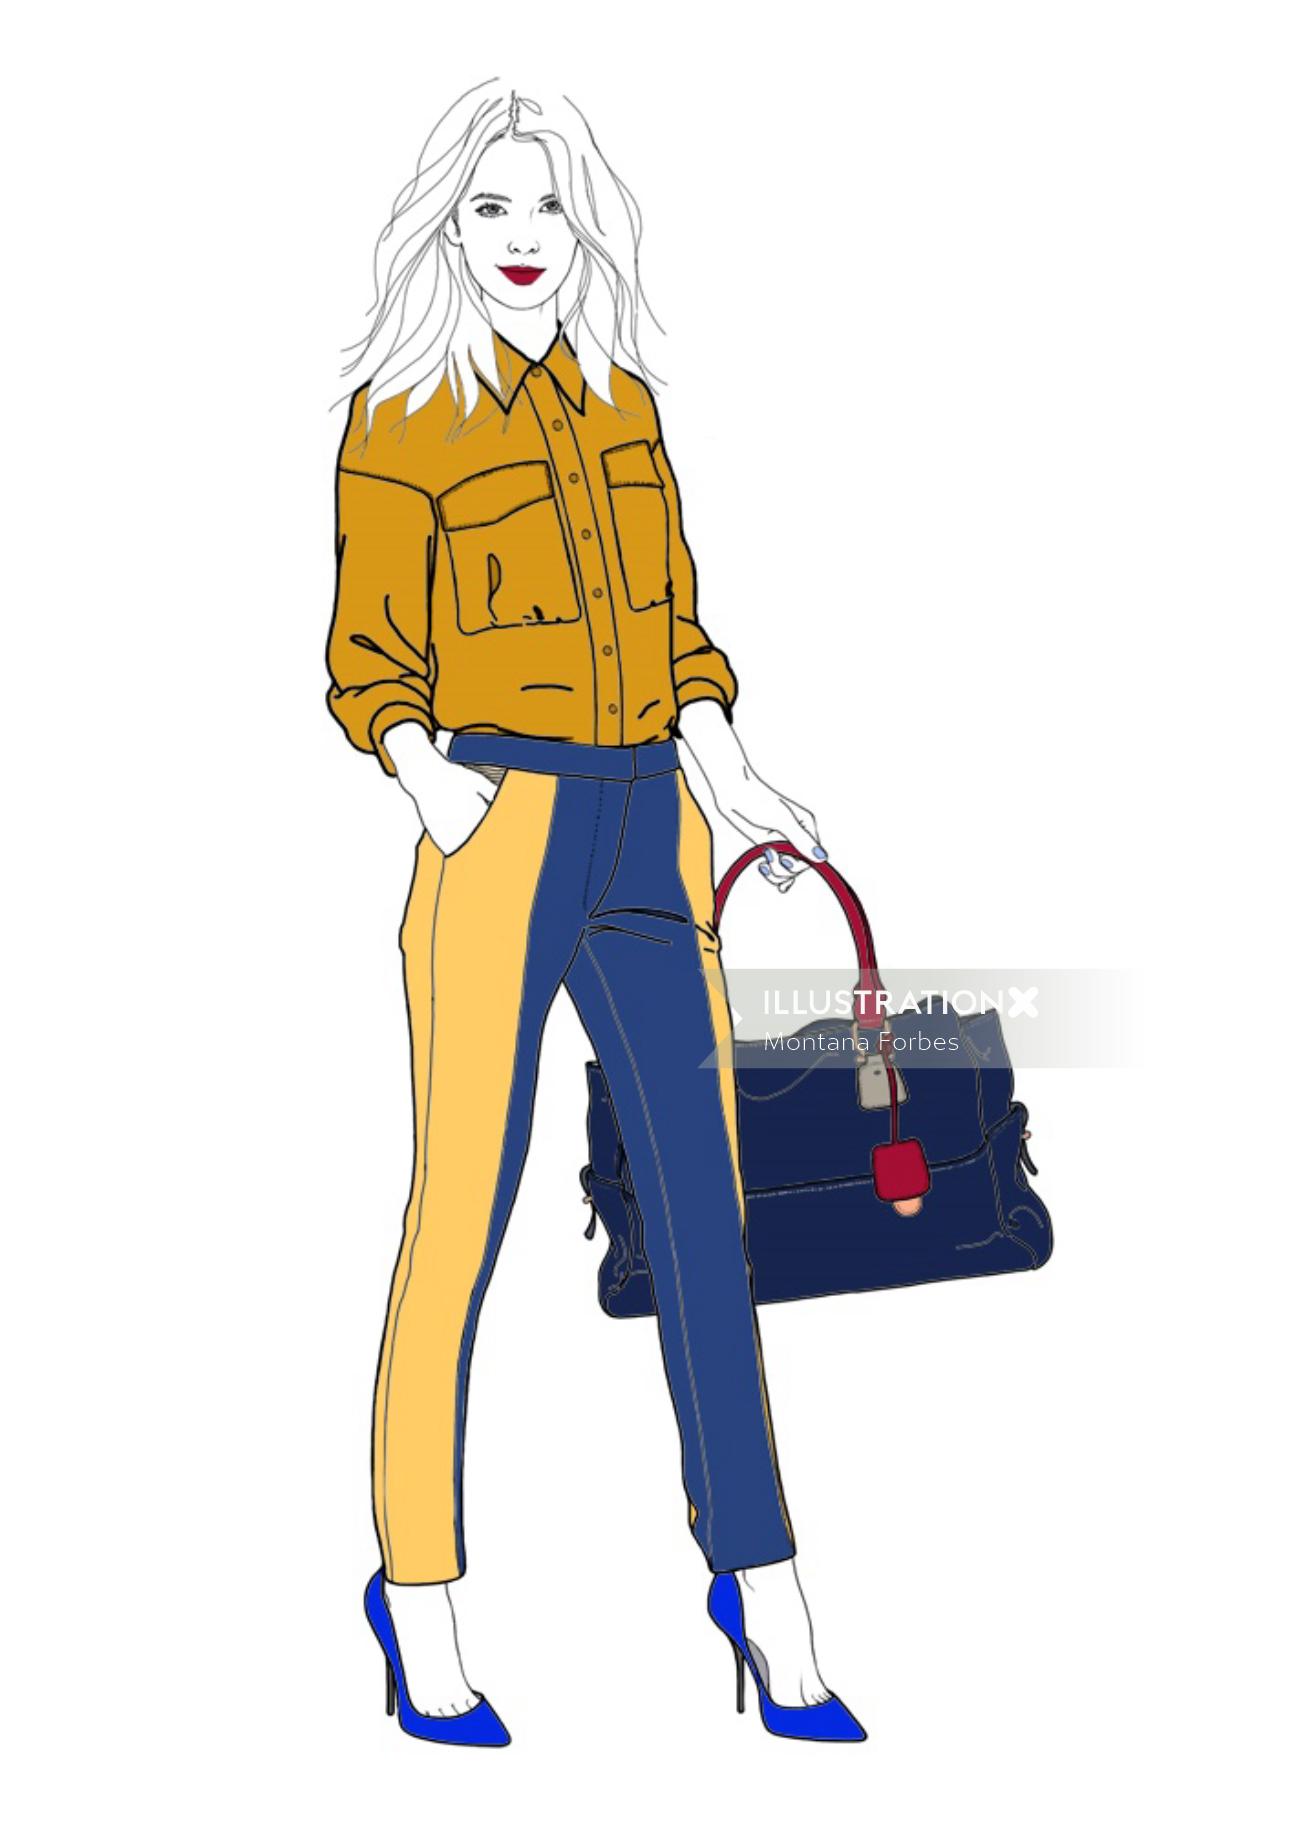 Lady holding bag illustration by Montana Forbes